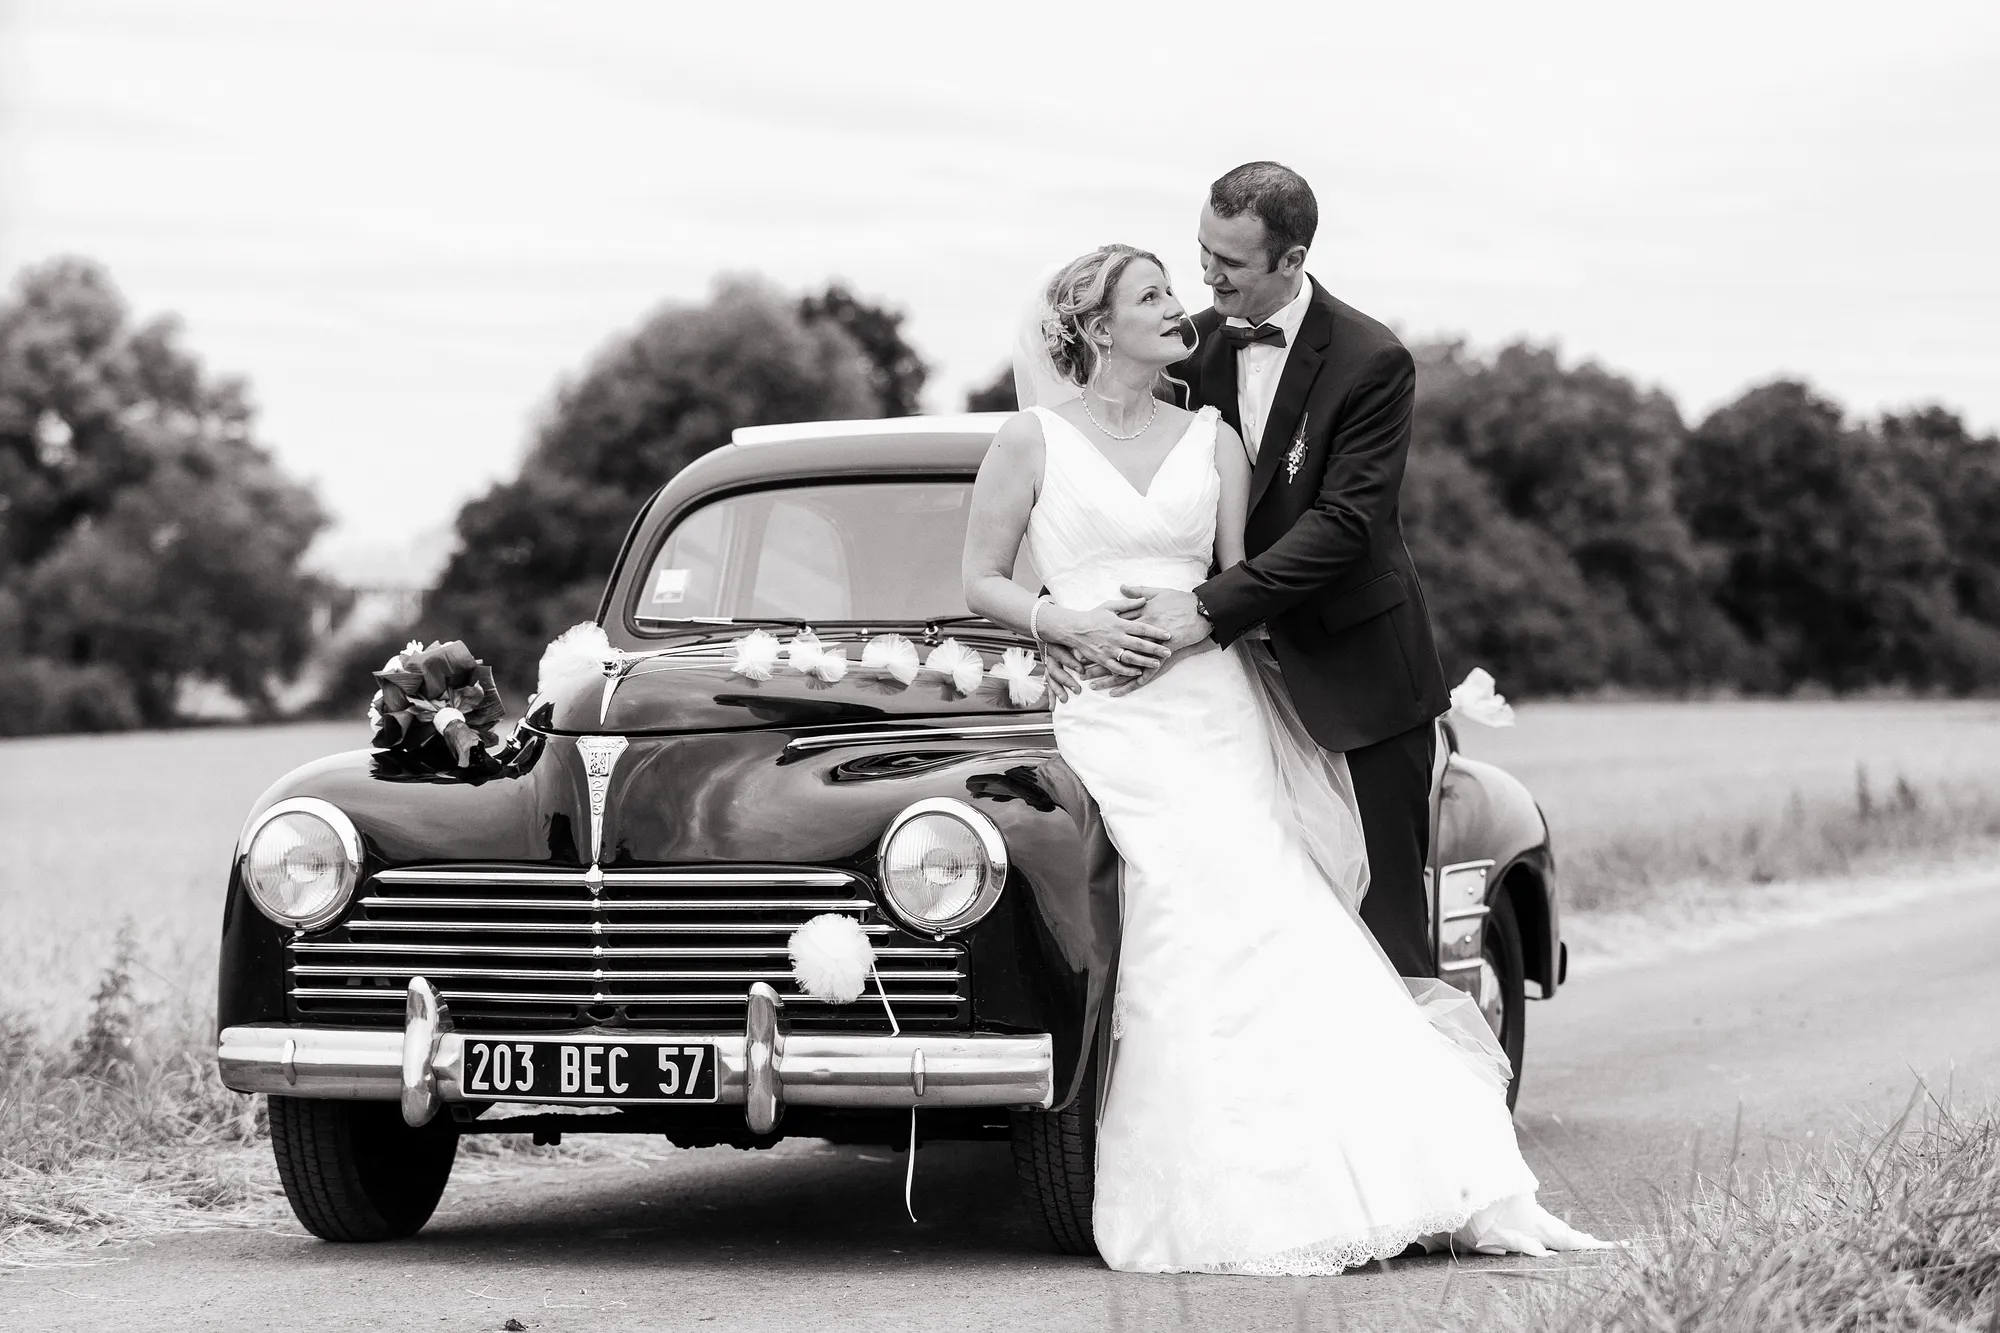 photographe mariage nancy vieille voiture campagne